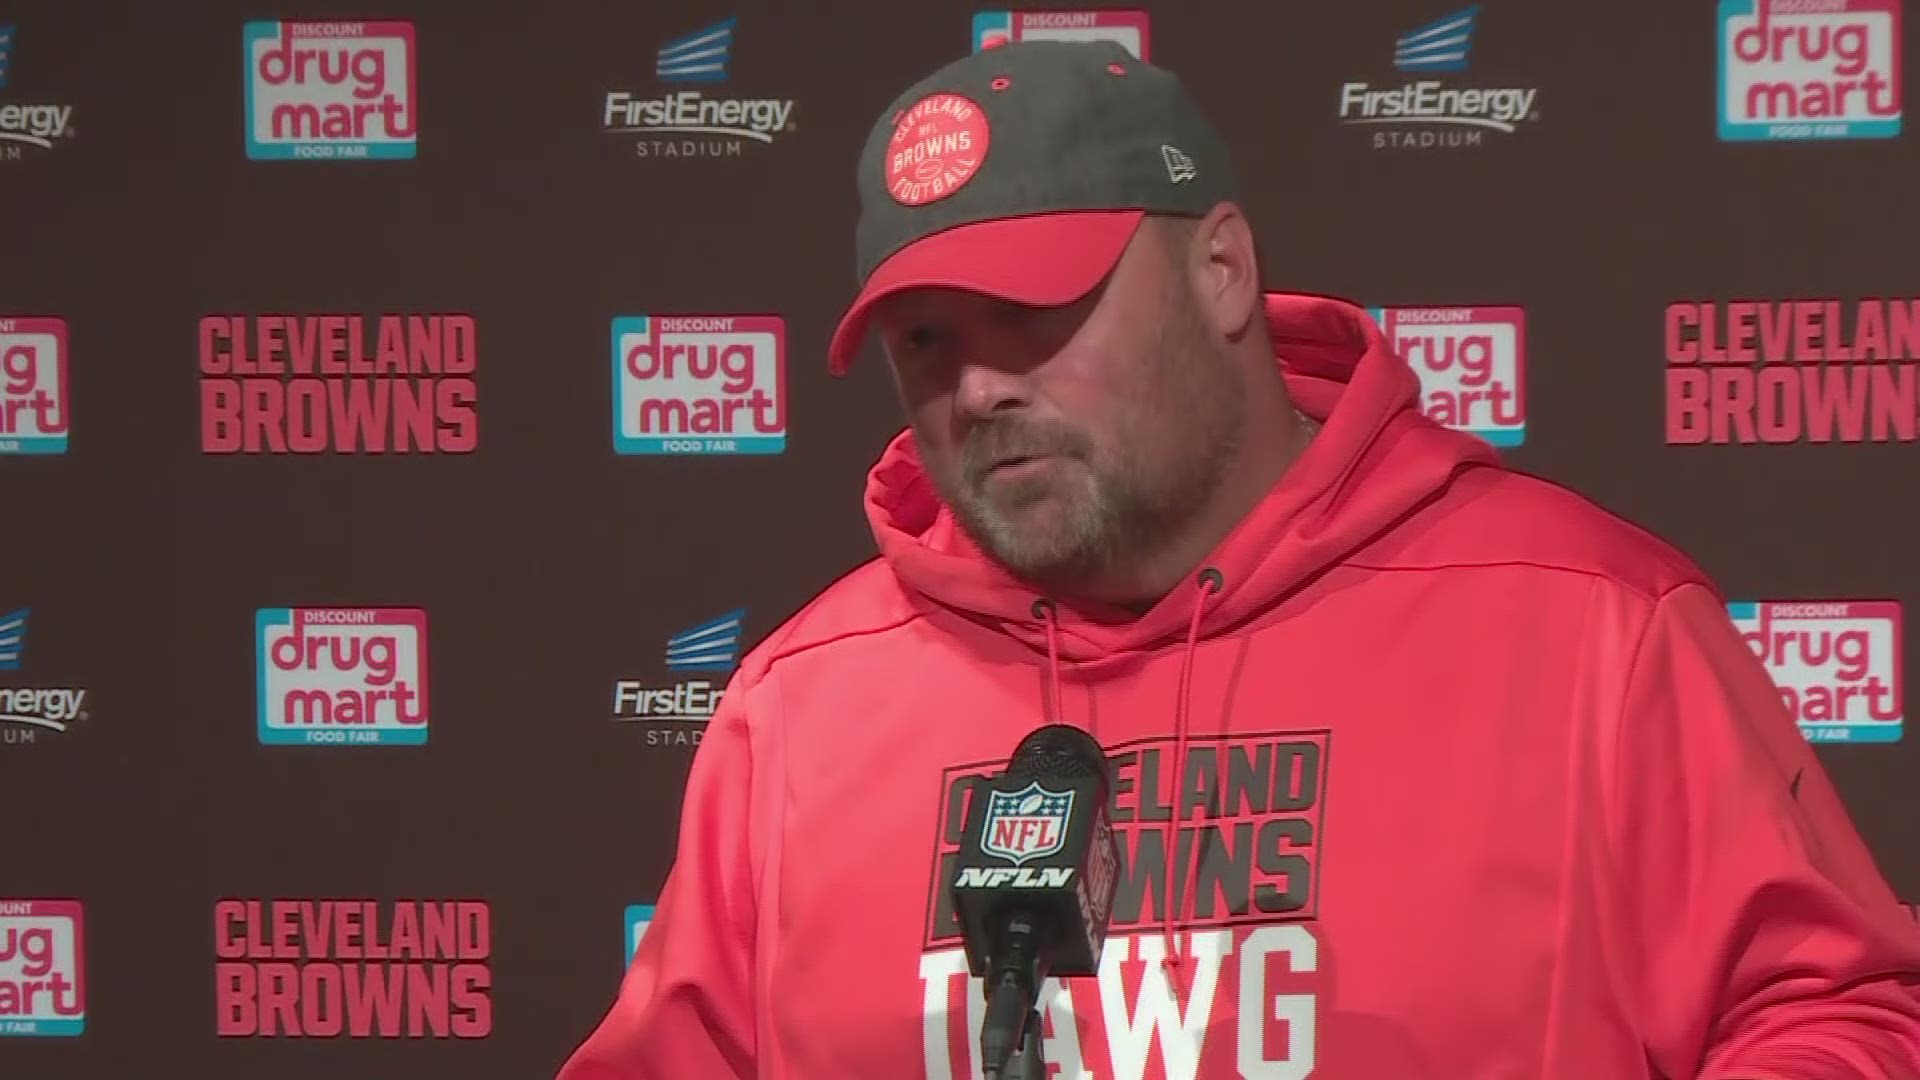 Cleveland Browns head coach Freddie Kitchens didn't shy away from the criticism following his team's 20-13 loss to the Los Angeles Rams on Sunday.